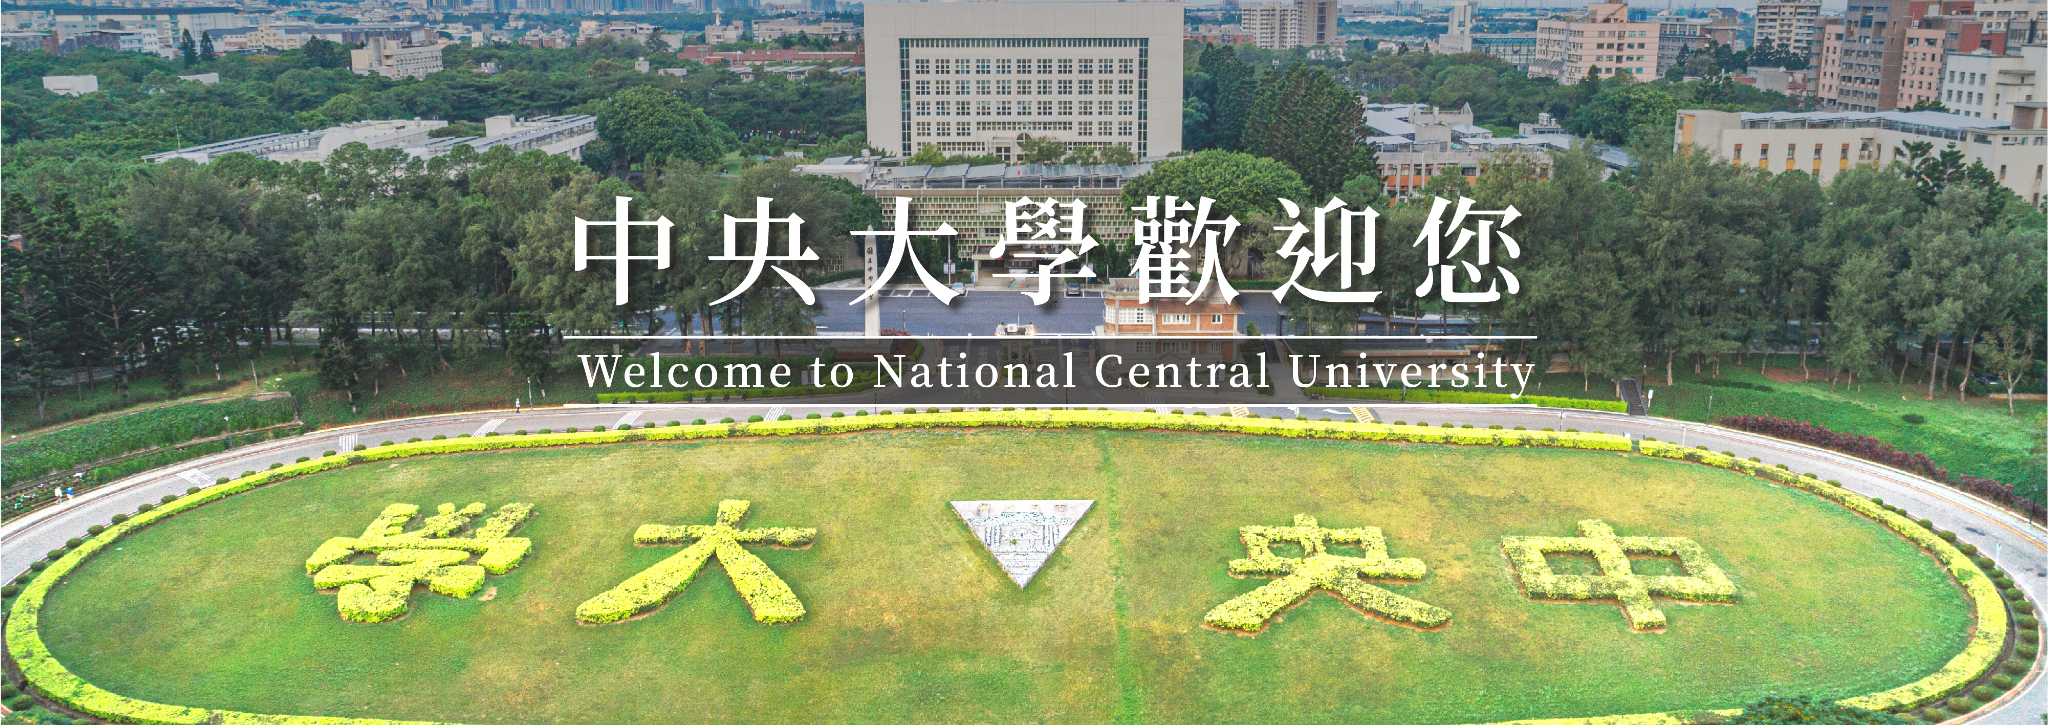 Welcome to National Central University!